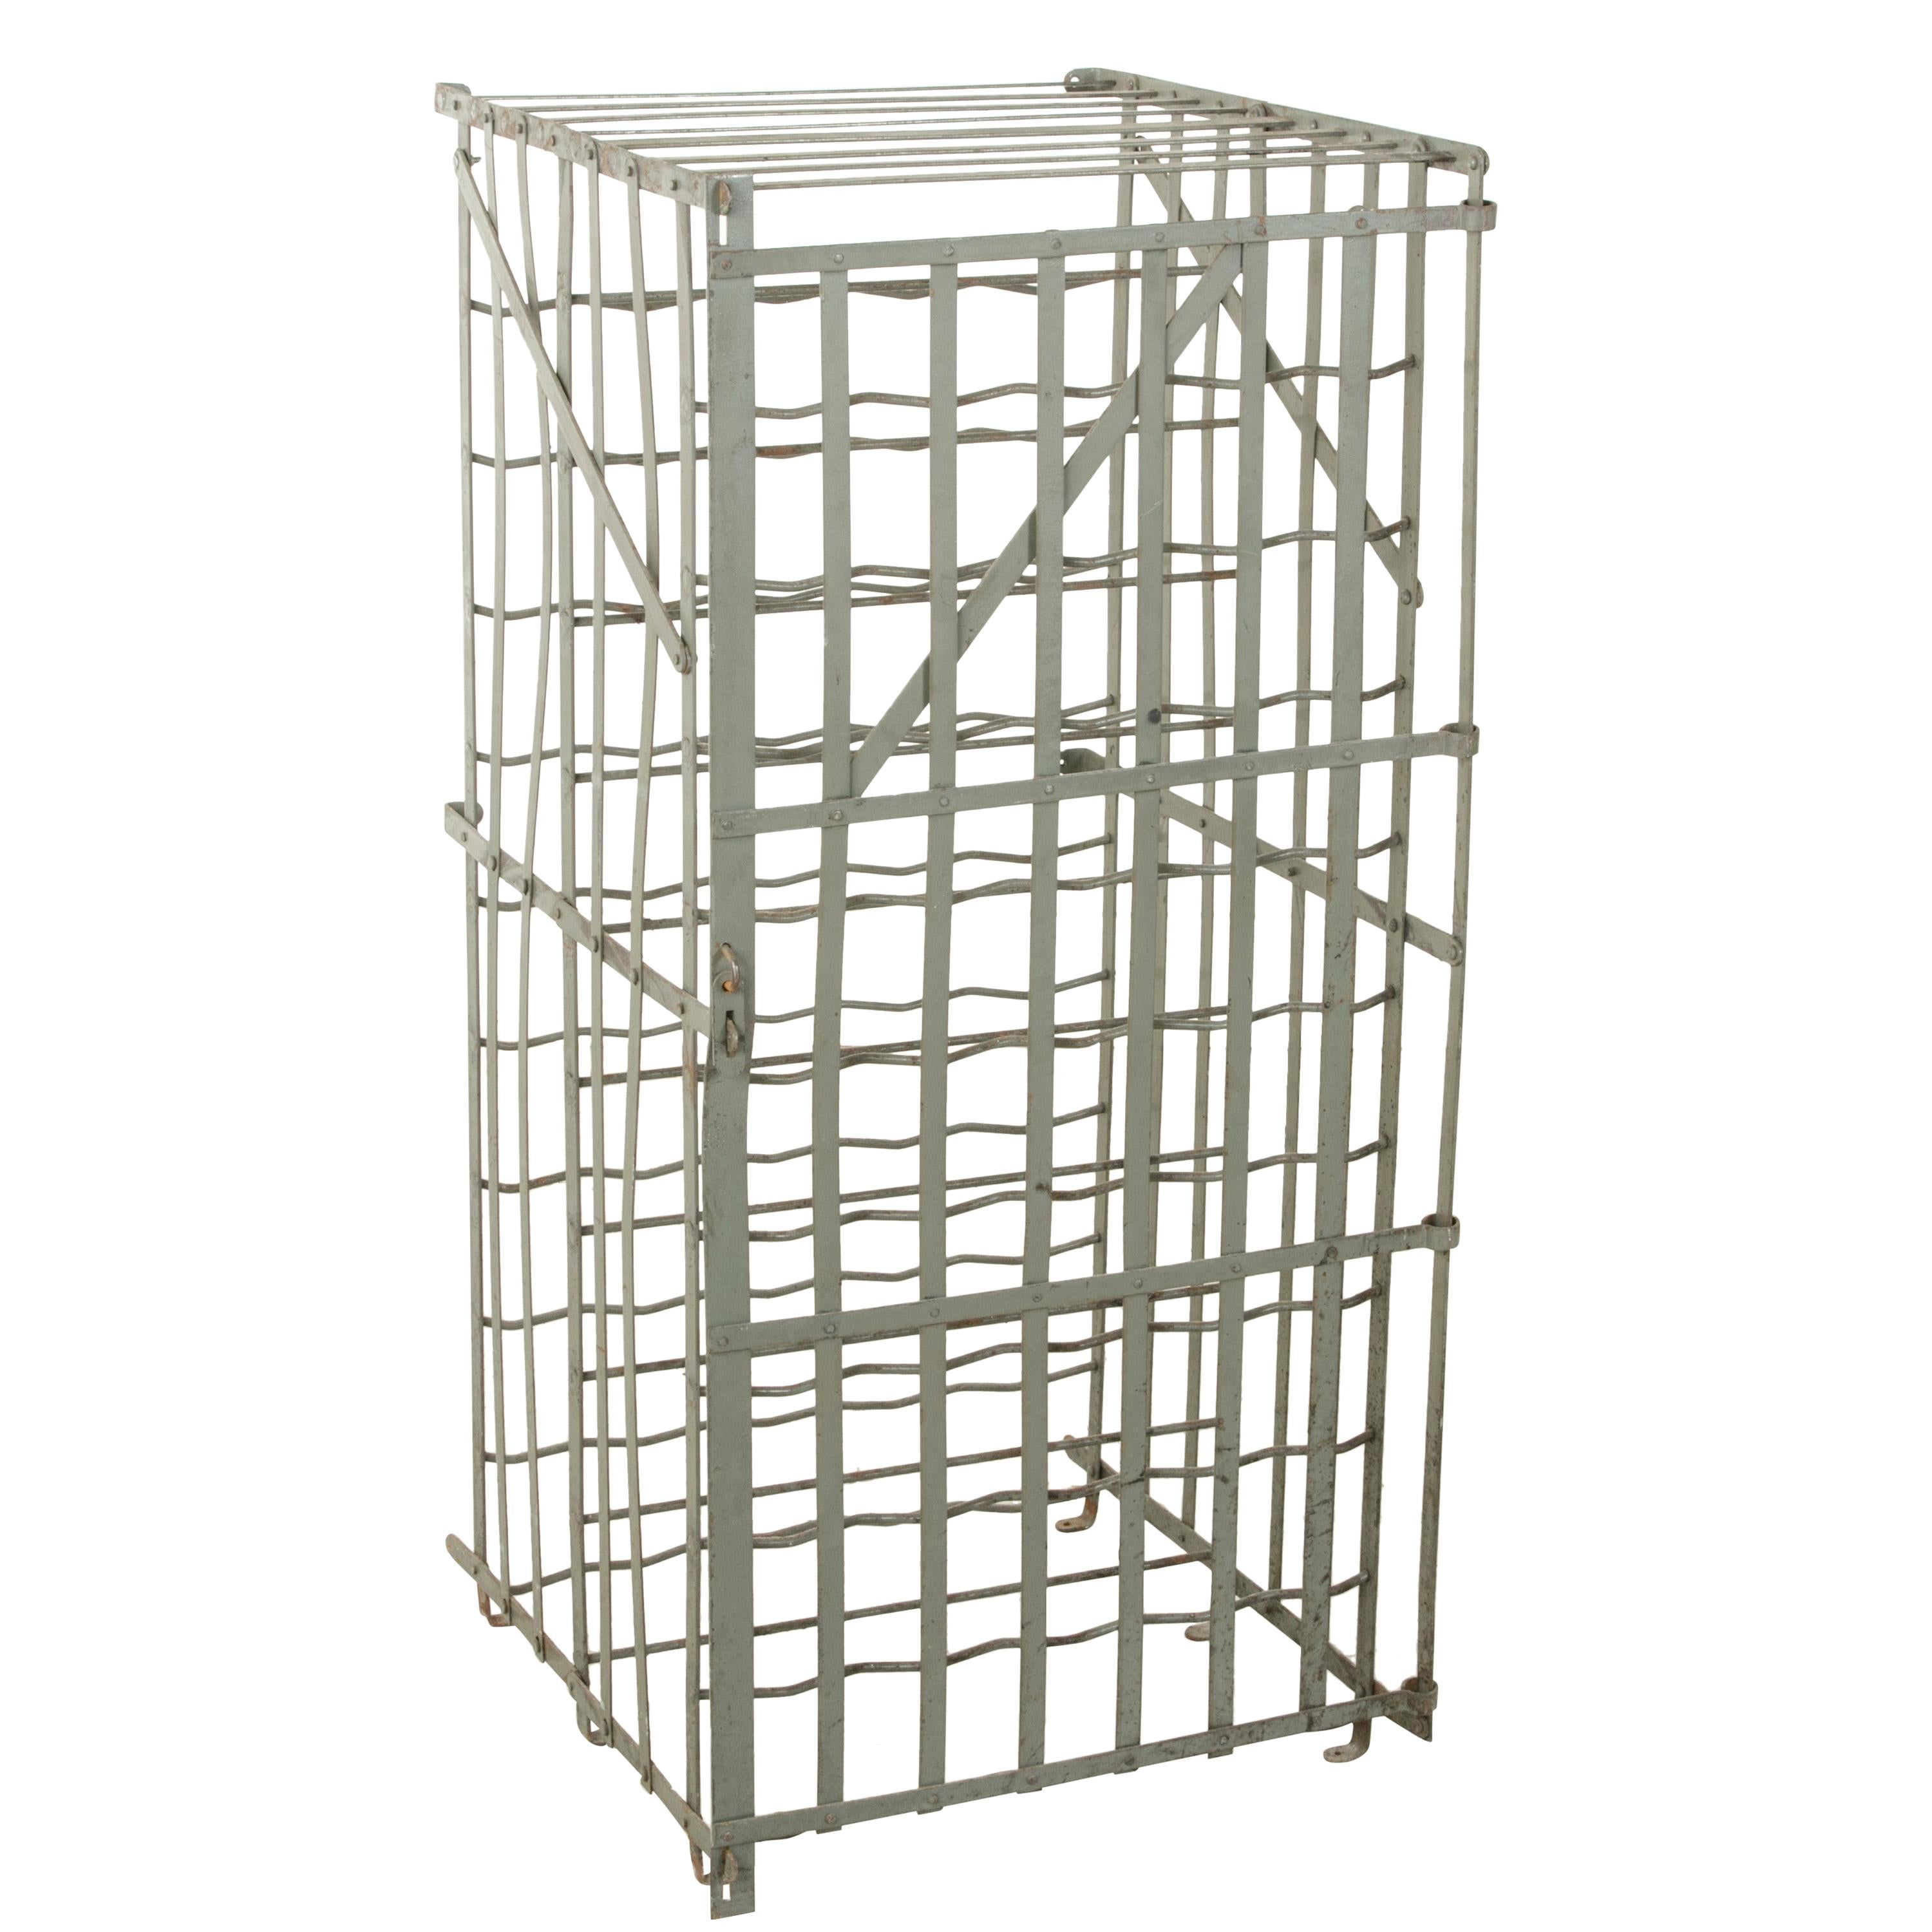 Early 20th Century French Riveted Iron Wine Cage